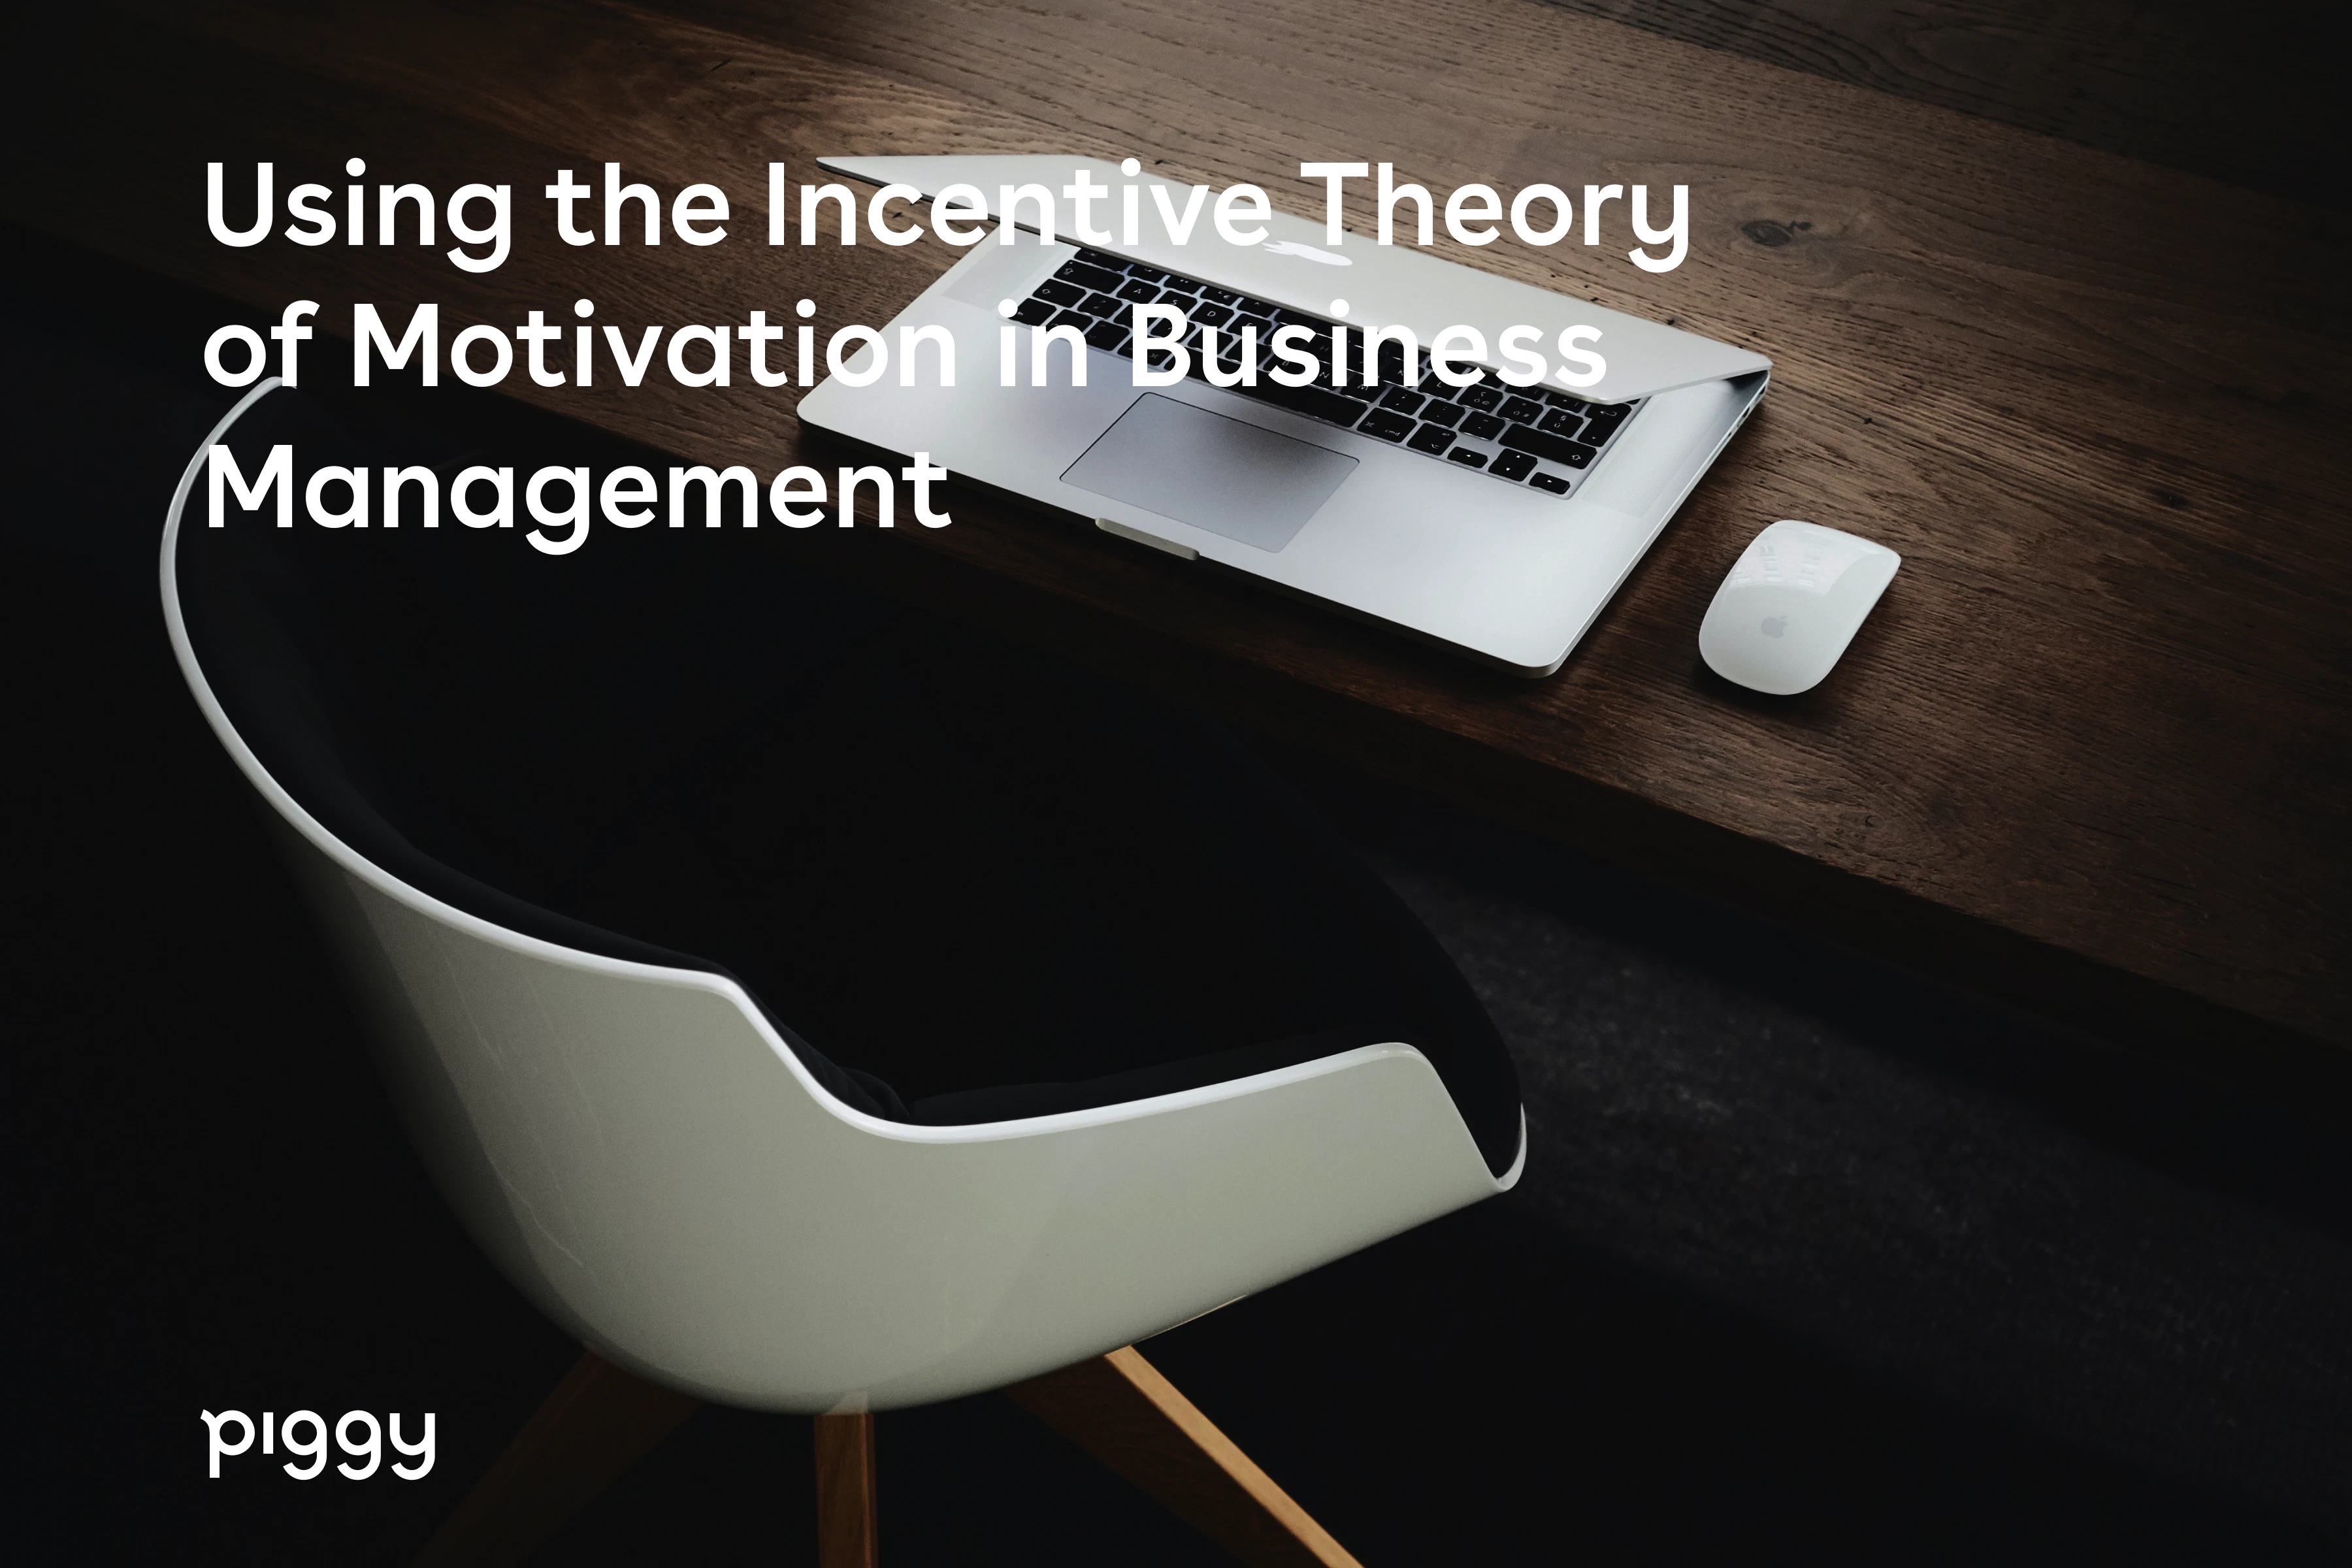 incentive-theory-motivation